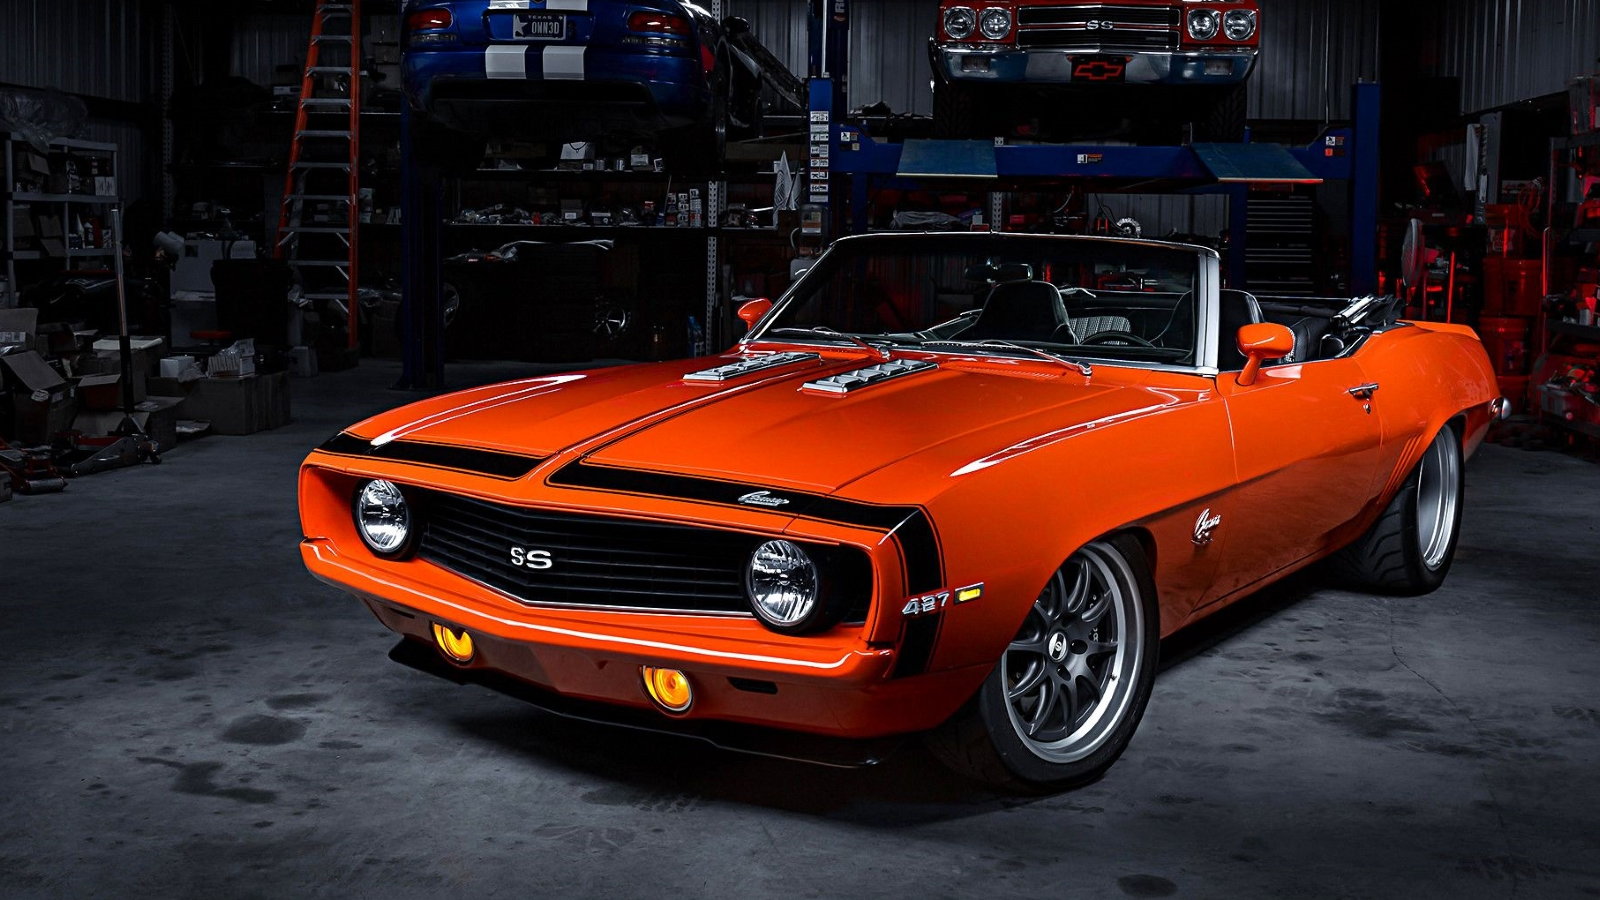 Check out LS!Tech founder's fiery orange LS7-powered Pro-Touring 1968 Camaro...